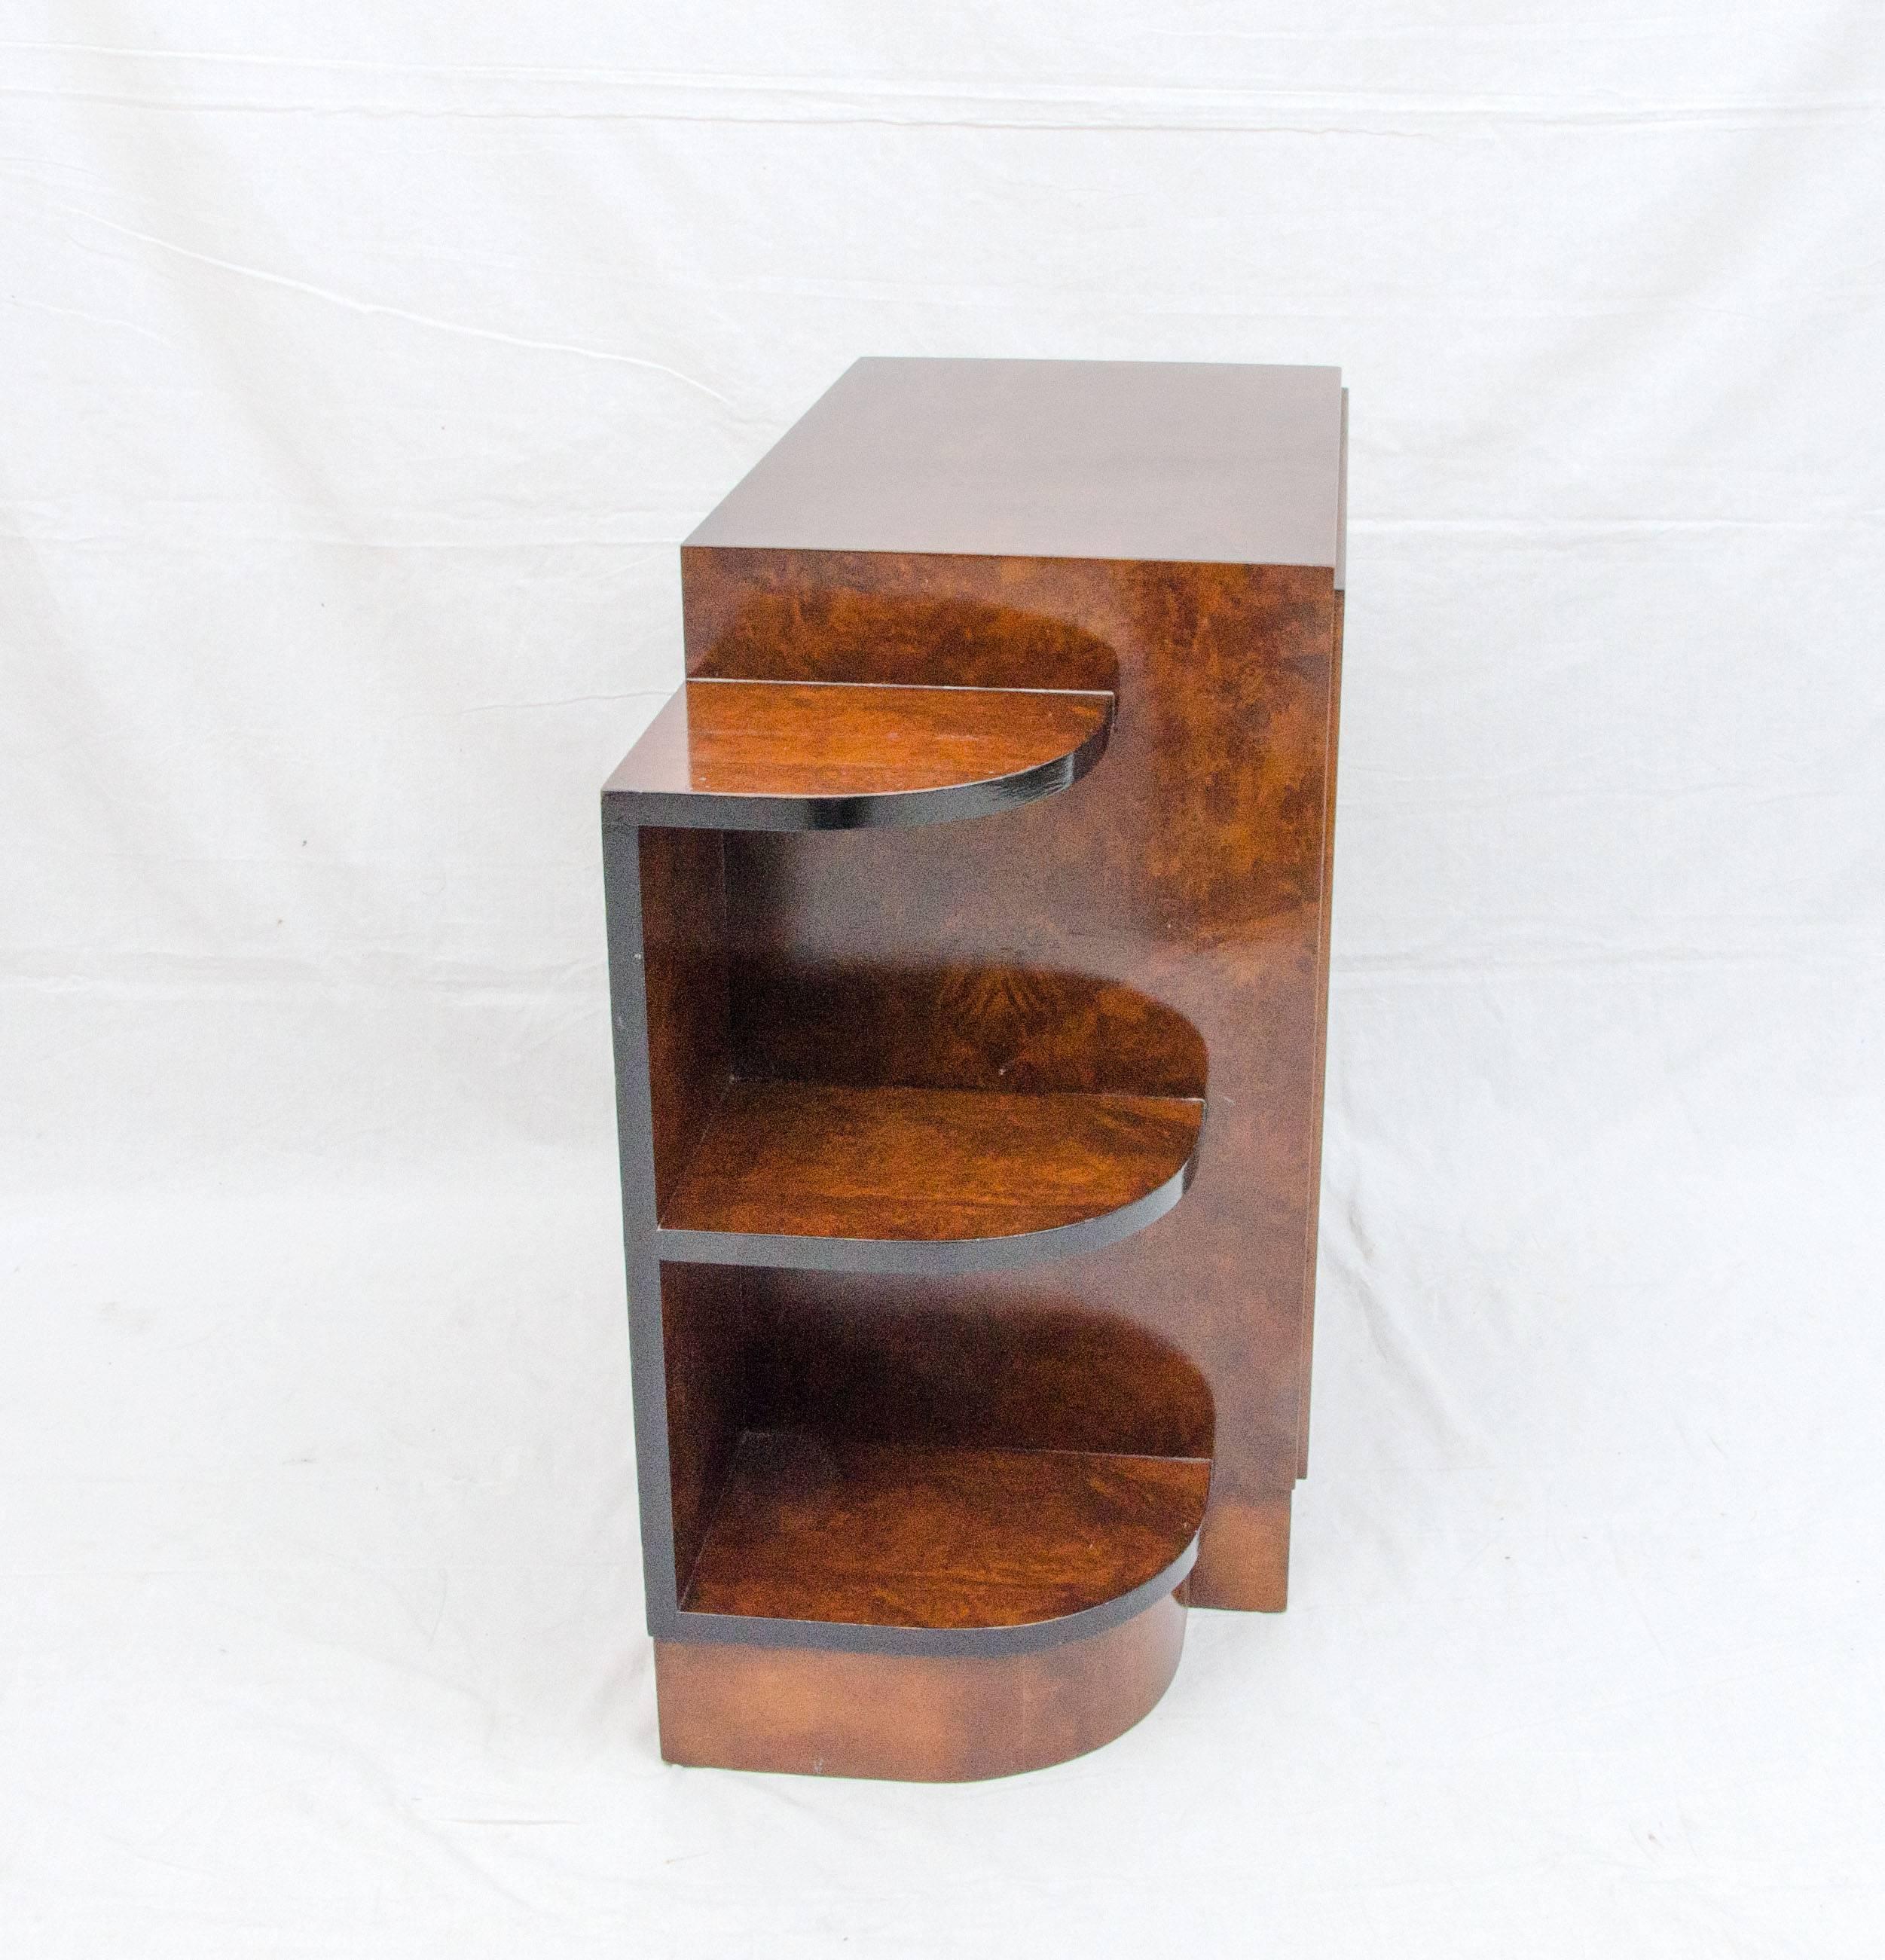 Very nice small shelf cabinet from the Art Deco period in burl walnut with black accents would be a great accent piece in a small space or in a hallway. Could be used for books, magazines, or to display a small collection of items. Curved shelves